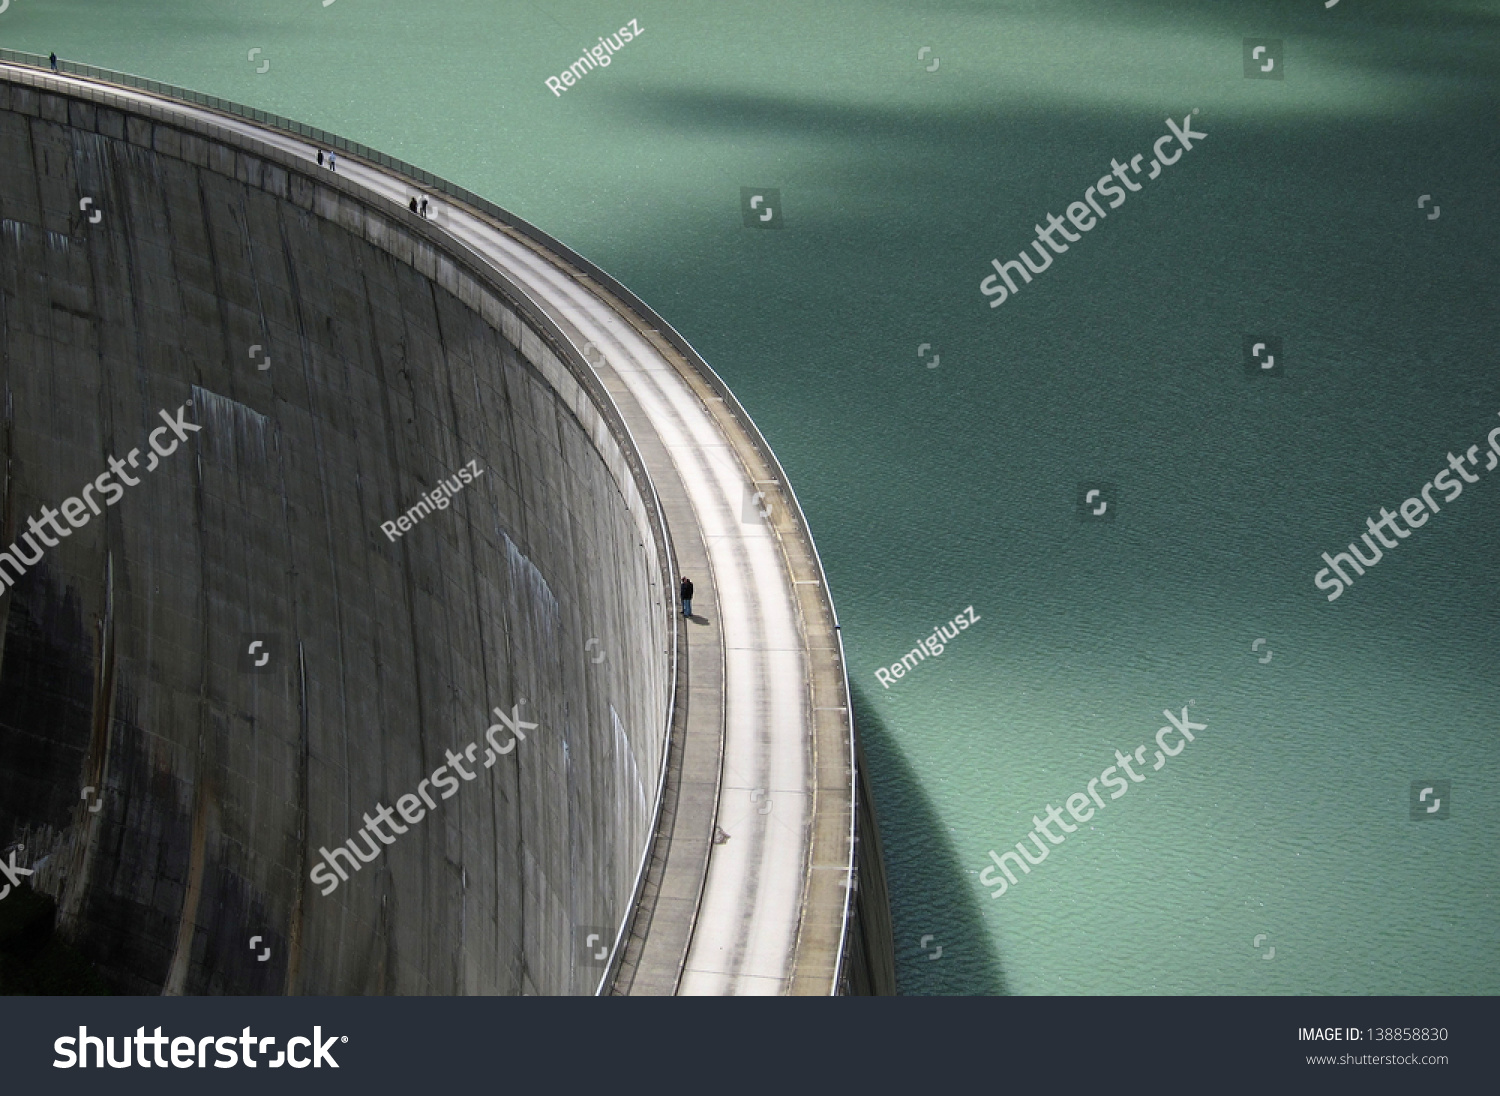 stock-photo-hydroelectric-dam-view-from-above-138858830.jpg